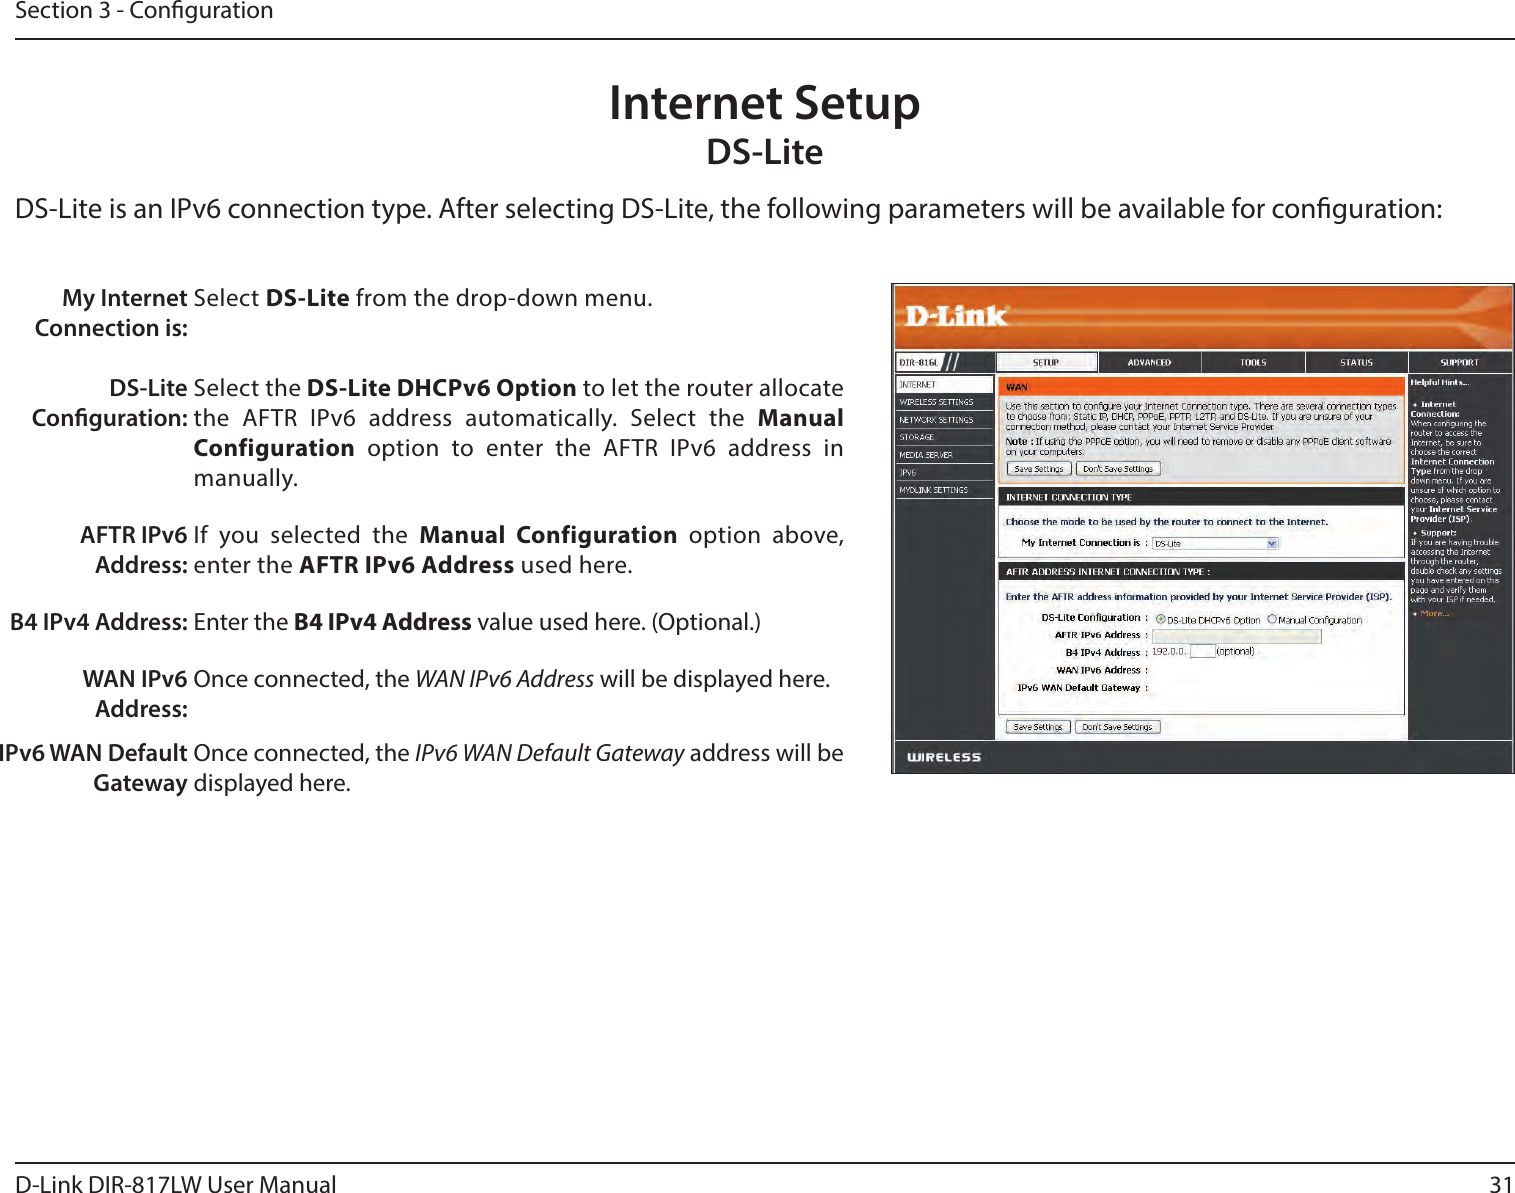 31D-Link DIR-817LW User ManualSection 3 - CongurationInternet SetupDS-LiteMy Internet Connection is:DS-Lite Conguration:Select DS-Lite from the drop-down menu.Select the DS-Lite DHCPv6 Option to let the router allocate the  AFTR  IPv6  address  automatically.  Select  the  Manual Configuration  option  to  enter  the  AFTR  IPv6  address  in manually.AFTR IPv6 Address:If  you  selected  the  Manual  Configuration  option  above, enter the AFTR IPv6 Address used here.B4 IPv4 Address: Enter the B4 IPv4 Address value used here. (Optional.)WAN IPv6 Address:Once connected, the WAN IPv6 Address will be displayed here.IPv6 WAN Default GatewayOnce connected, the IPv6 WAN Default Gateway address will be displayed here.DS-Lite is an IPv6 connection type. After selecting DS-Lite, the following parameters will be available for conguration: